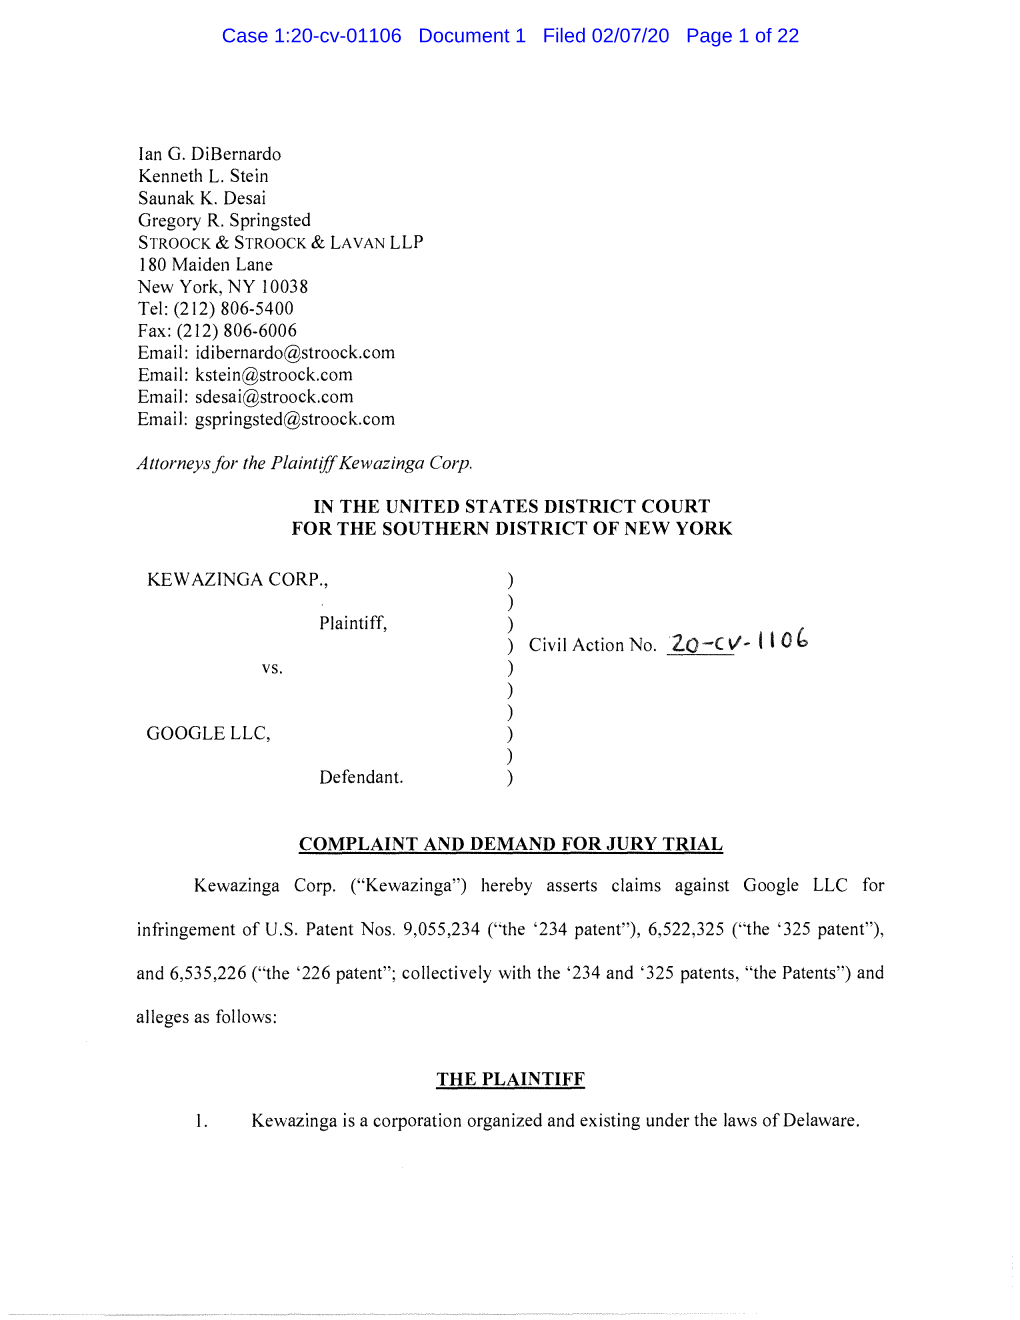 Case 1:20-Cv-01106 Document 1 Filed 02/07/20 Page 1 of 22